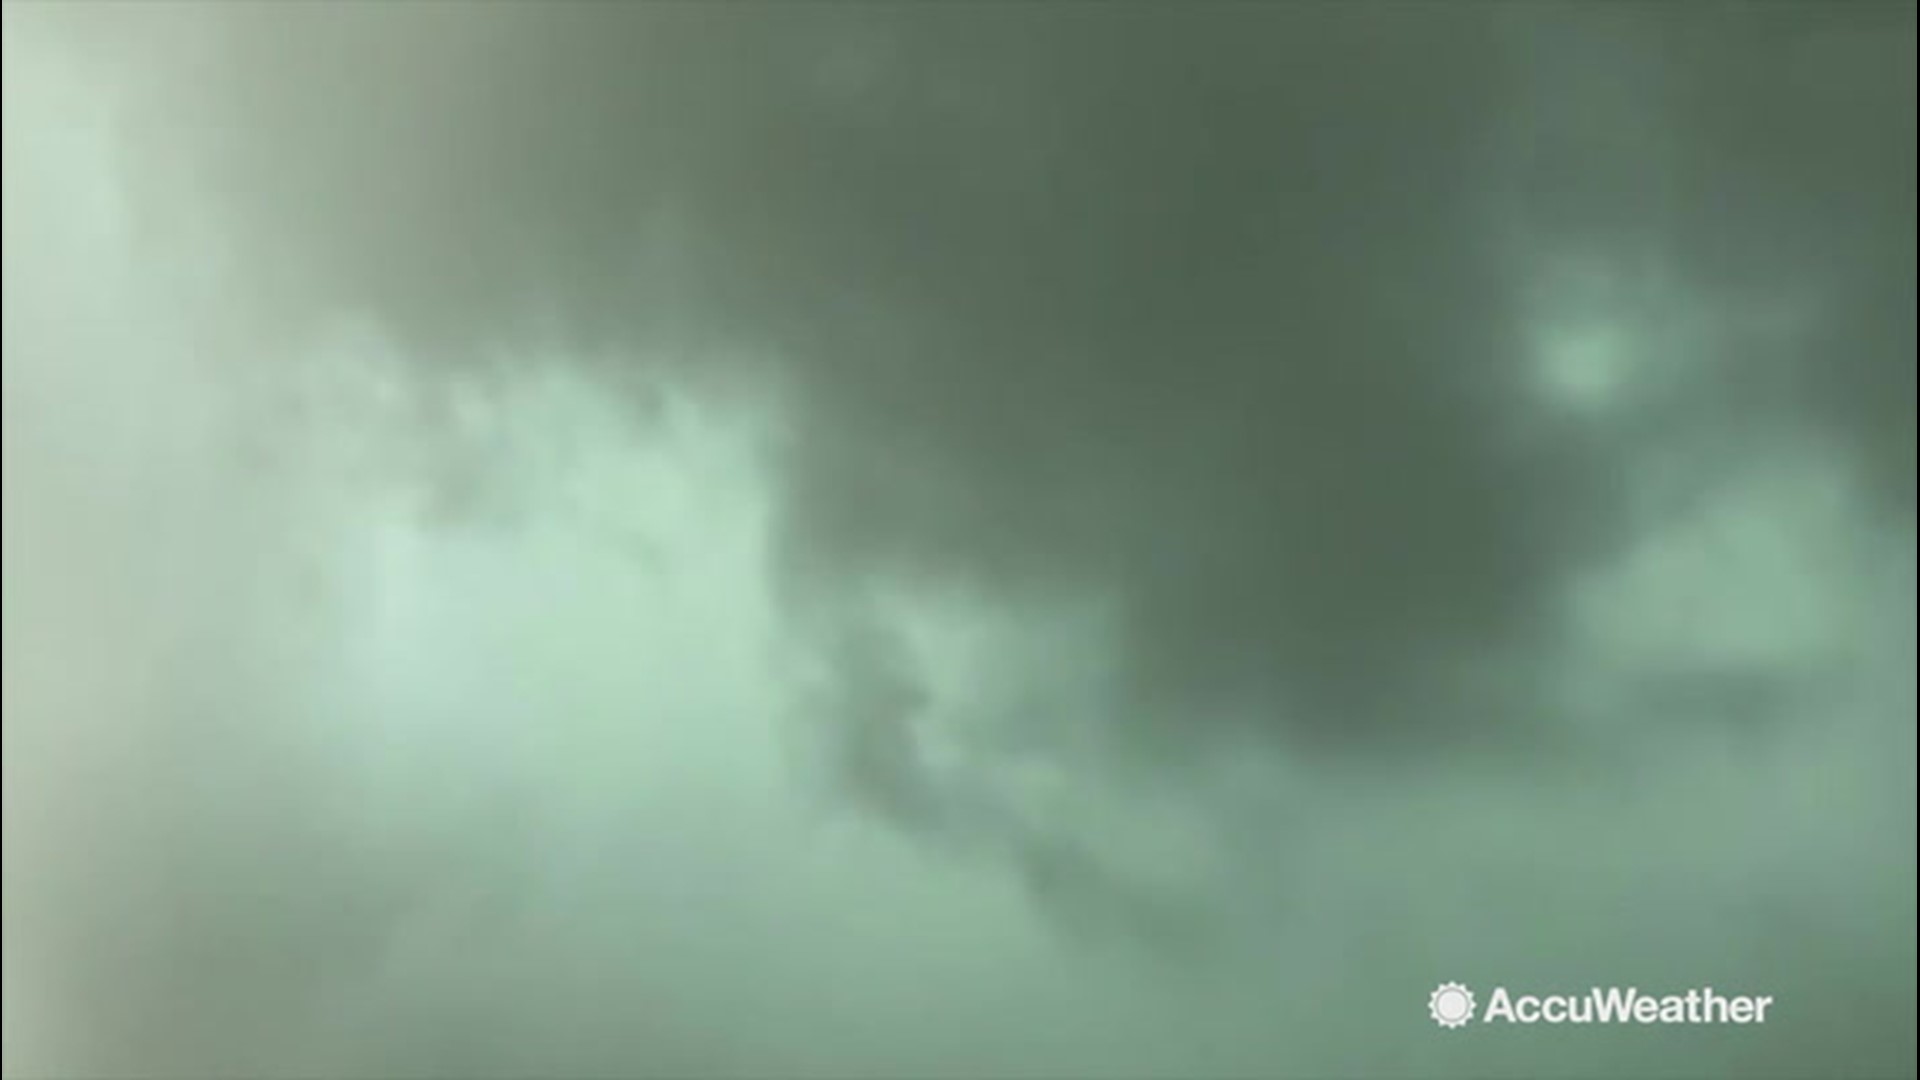 Storm chaser Reed Timmer captured this look at a funnel cloud concealed within heavy rainfall in Bethune, Colorado, on Aug. 13.